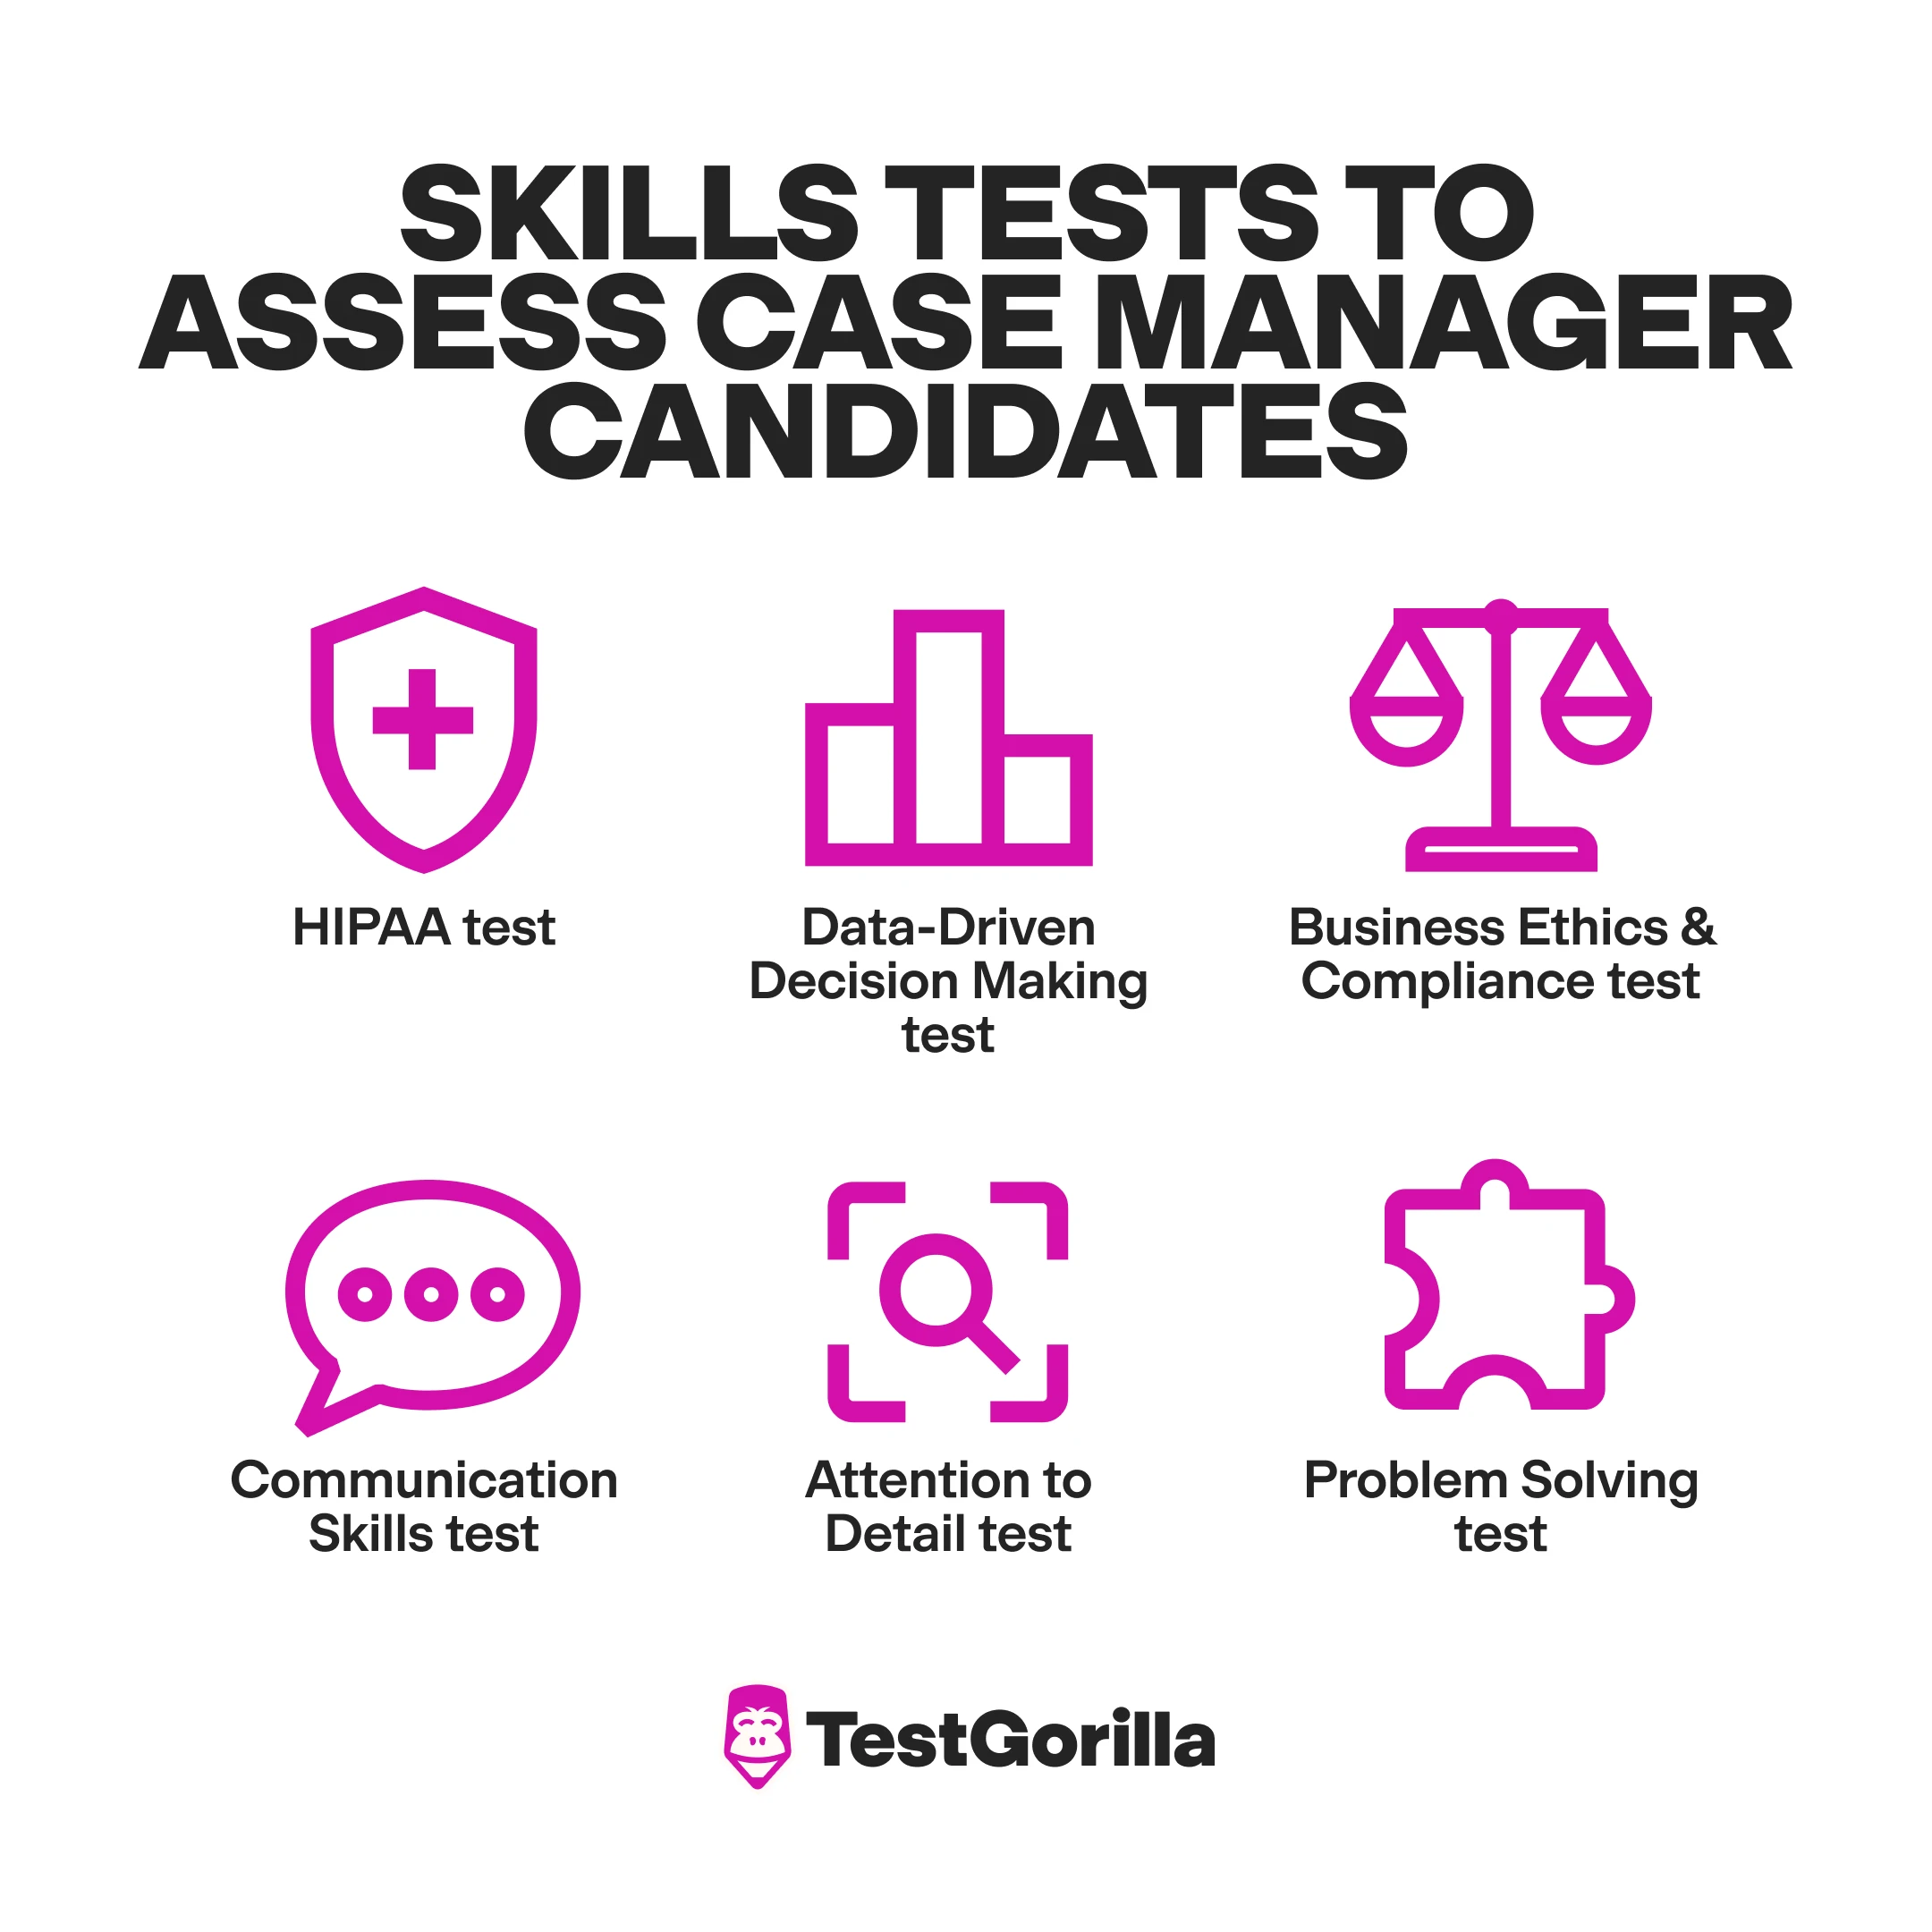 Skill tests to assess case manager candidates